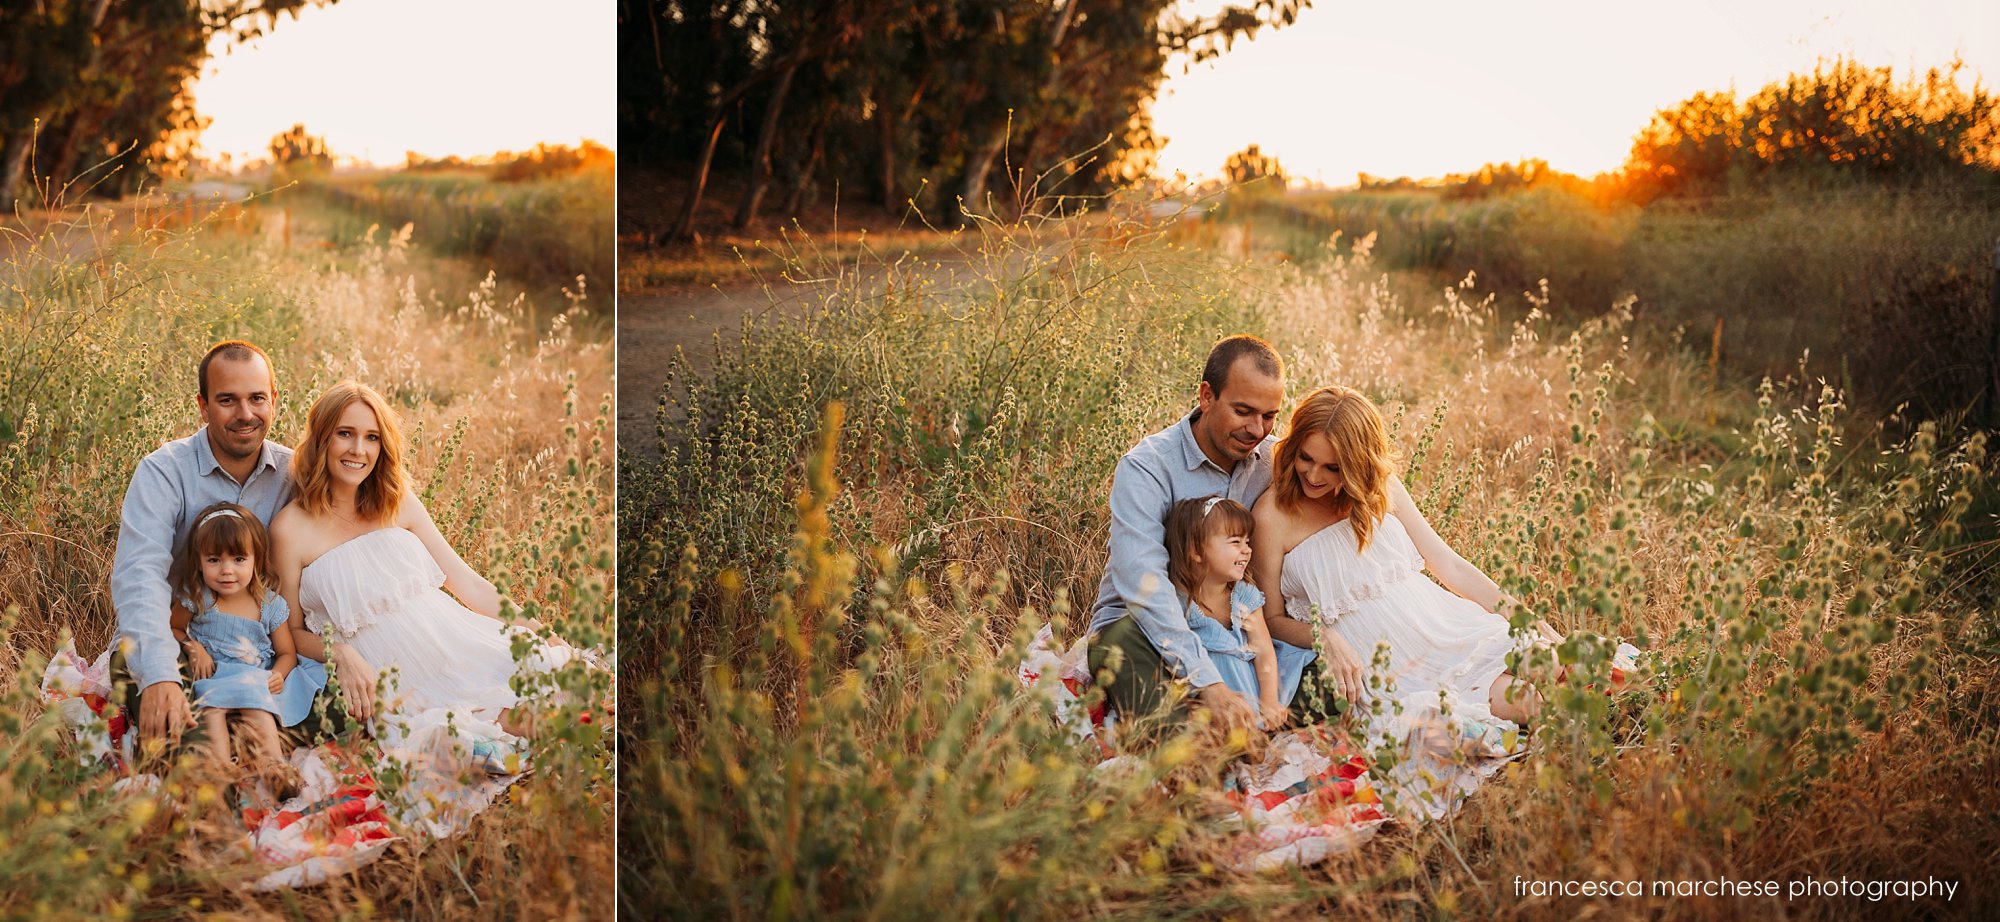 Maternity family session in golden hour Orange County, CA Long Beach Francesca Marchese Photography